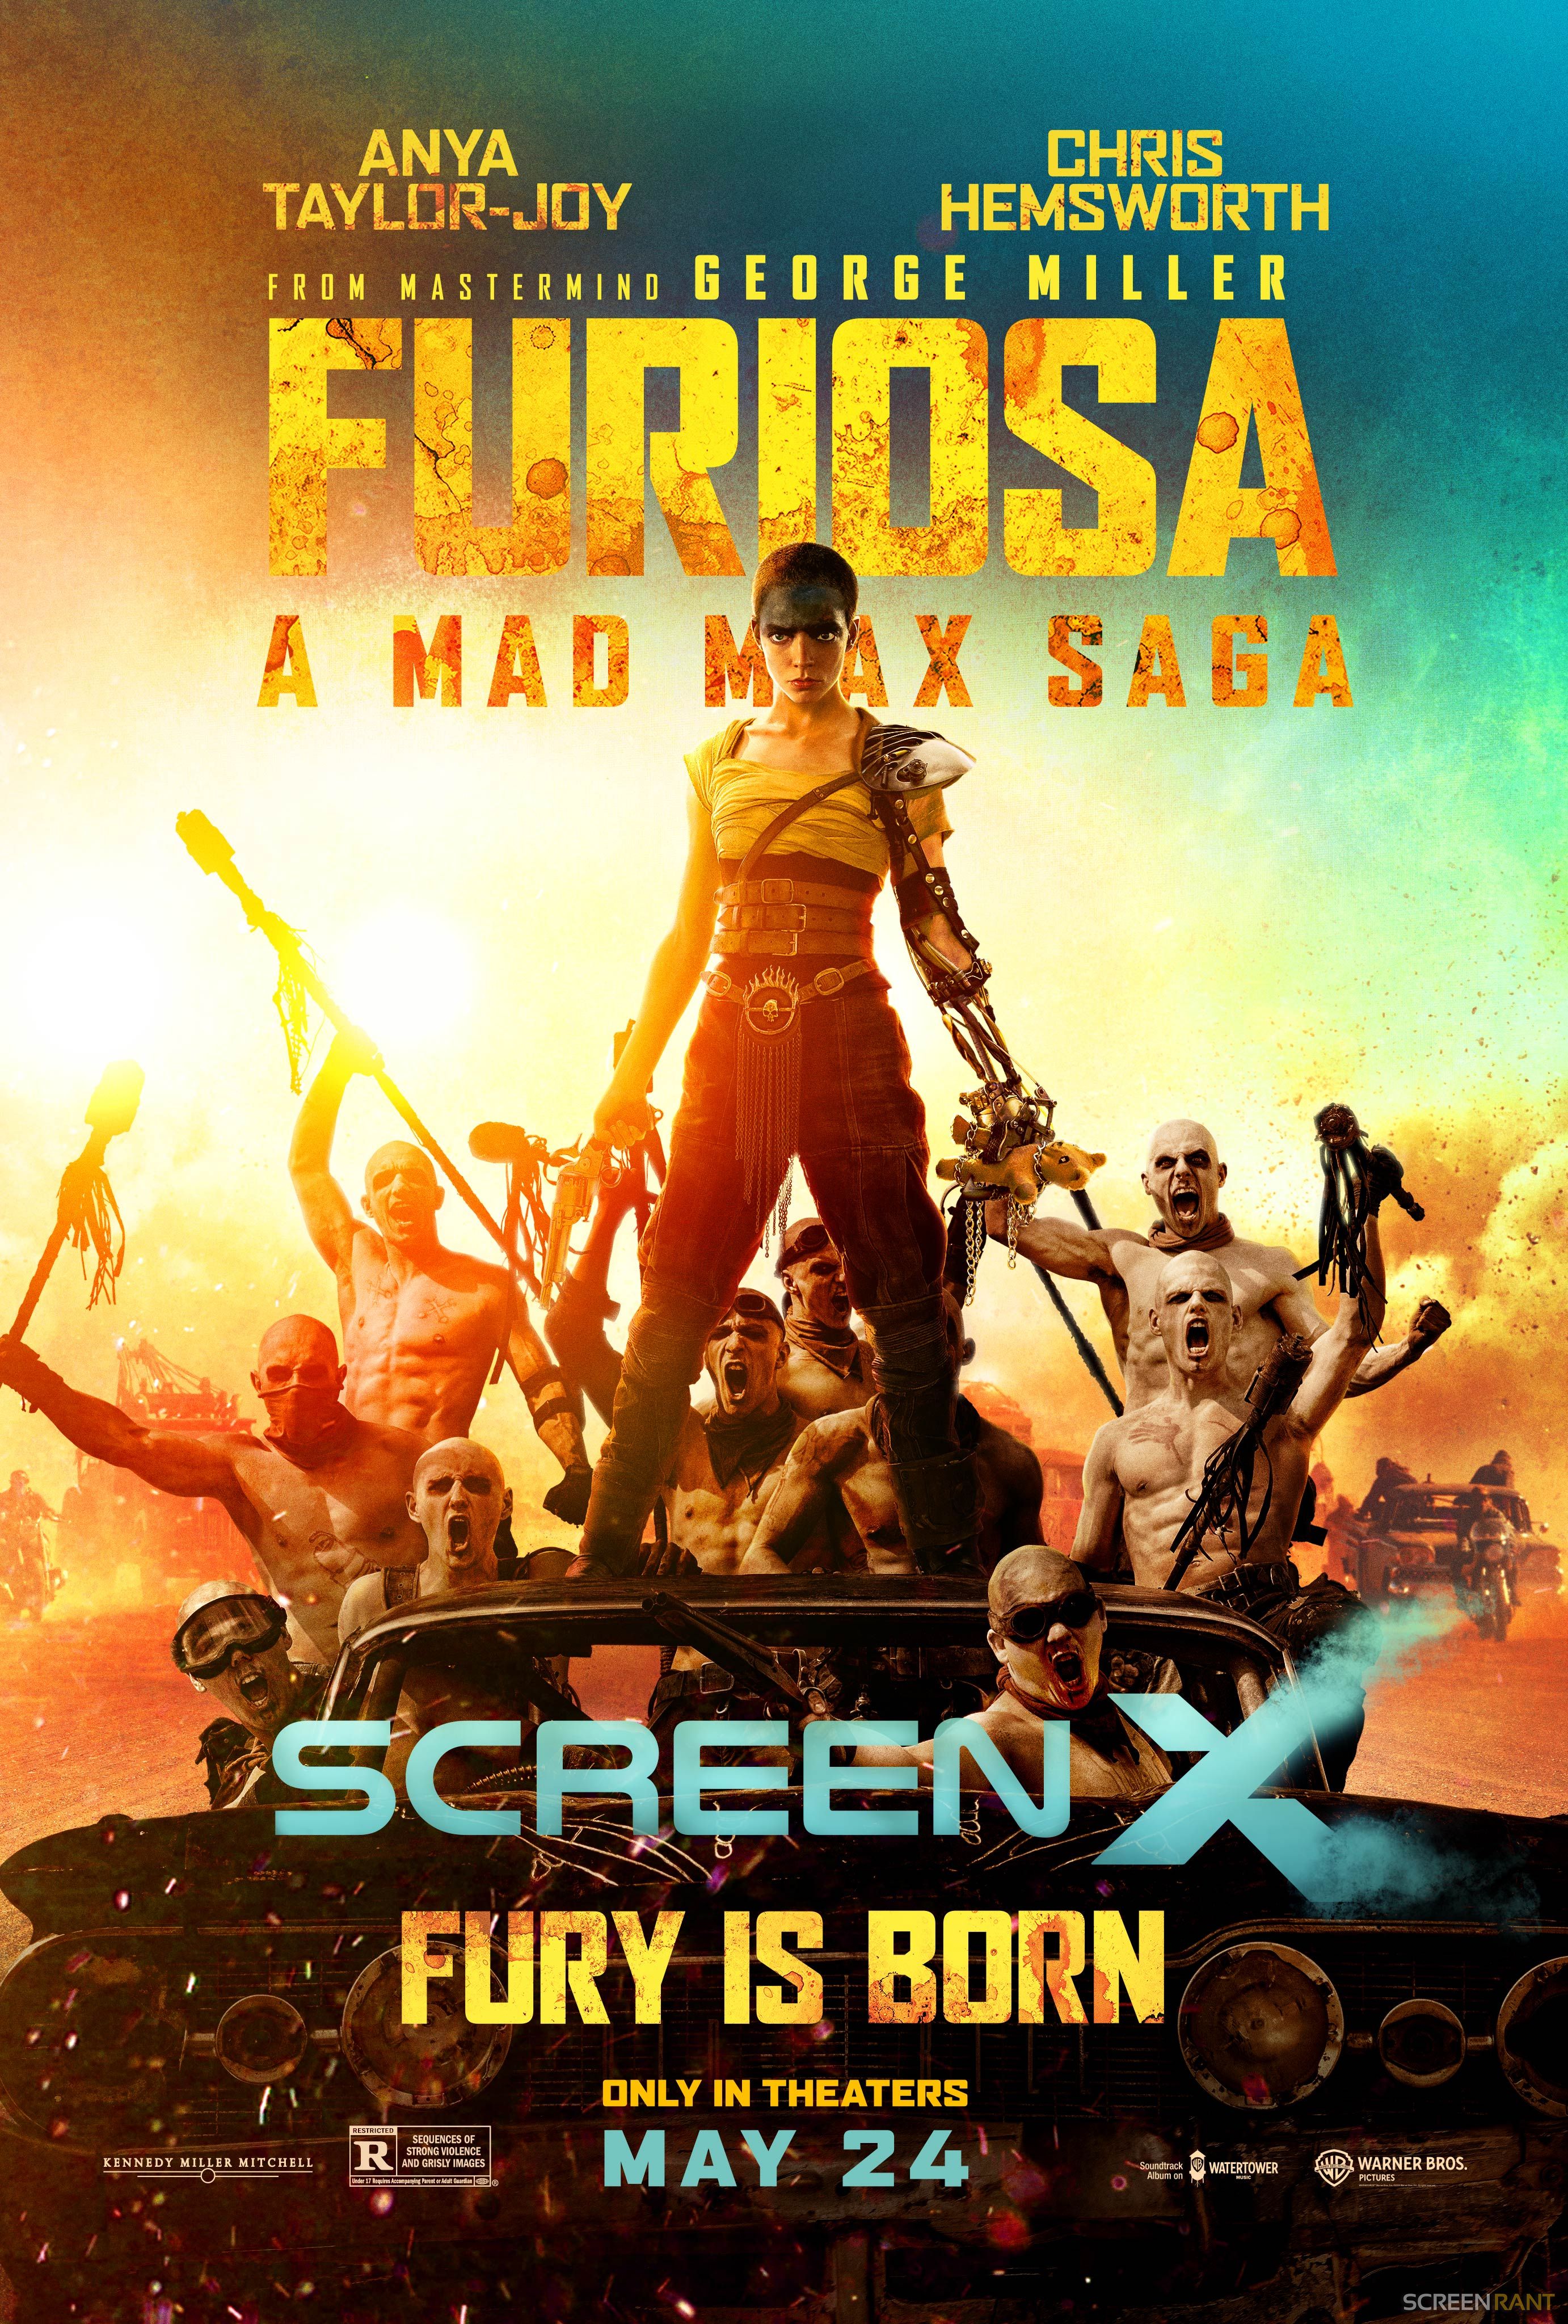 Witness This ScreenX Exclusive Furiosa Poster